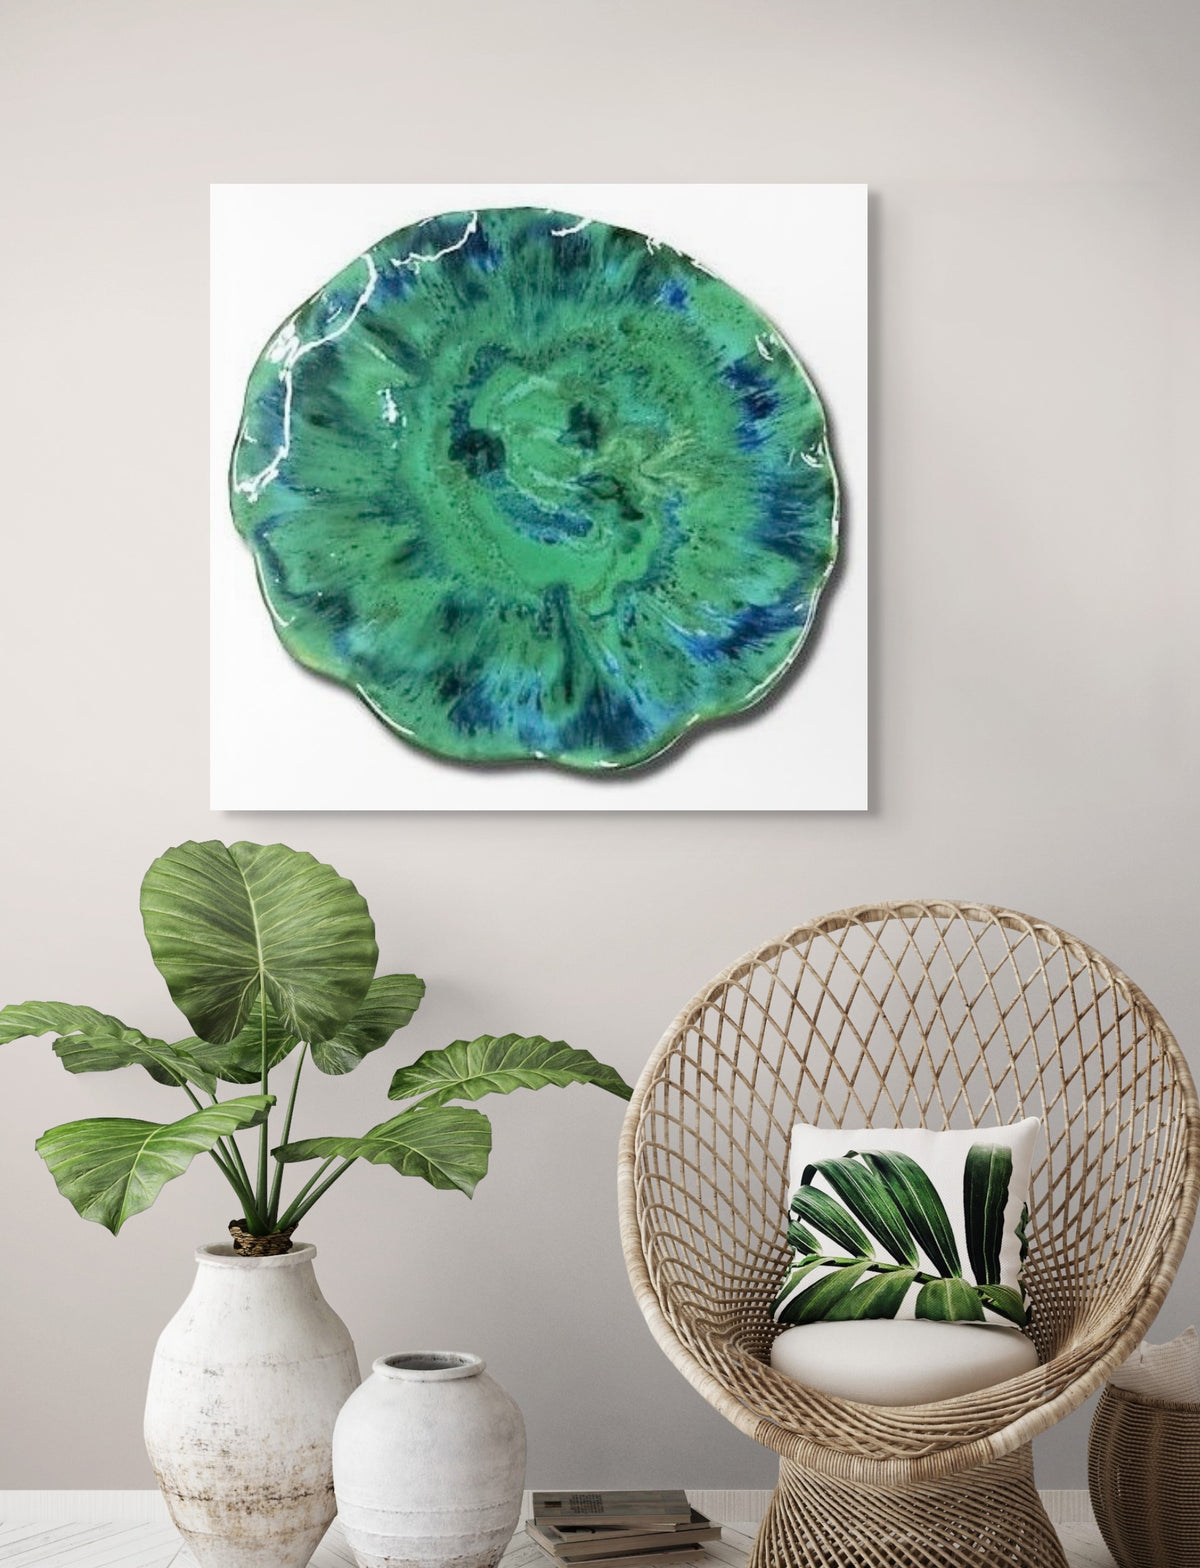 Transform your living spaces into sanctuaries of elegance with my exquisite handmade circular ceramic wall plaque.